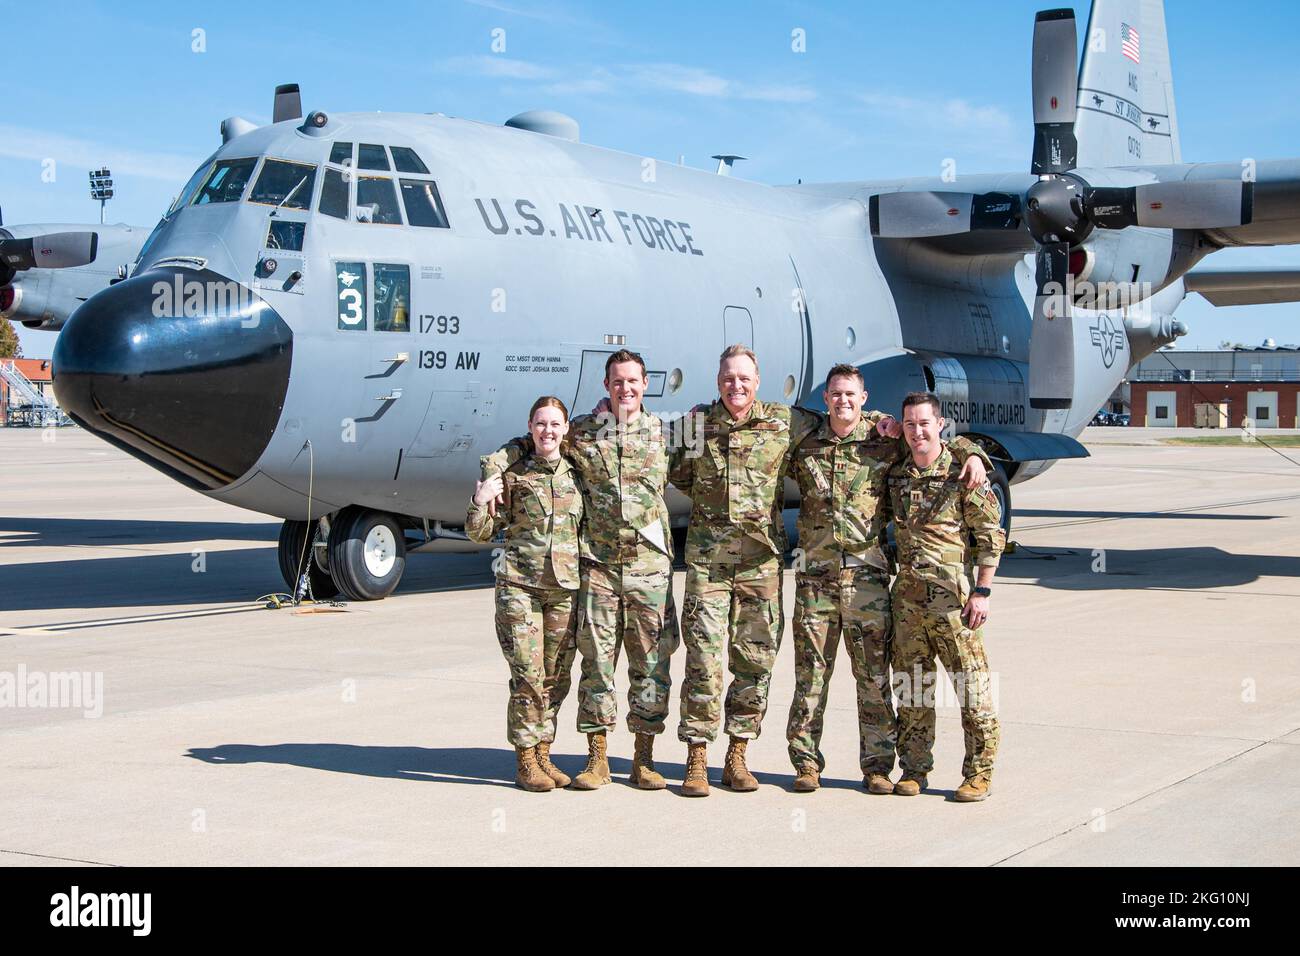 From left: Tech. Sgt. Kacie McCullough, Staff Sgt. Braden Bigham, Chief Master Sgt. John Bigham, Capt. Justin Bigham, and Capt. Riley Coats pose for a photo at Rosecrans Air National Guard Base, St. Joseph, Missouri, Oct. 20, 2022. All four of Chief Bigham’s children are currently serving at the 139th Airlift Wing, Missouri Air National Guard. Stock Photo